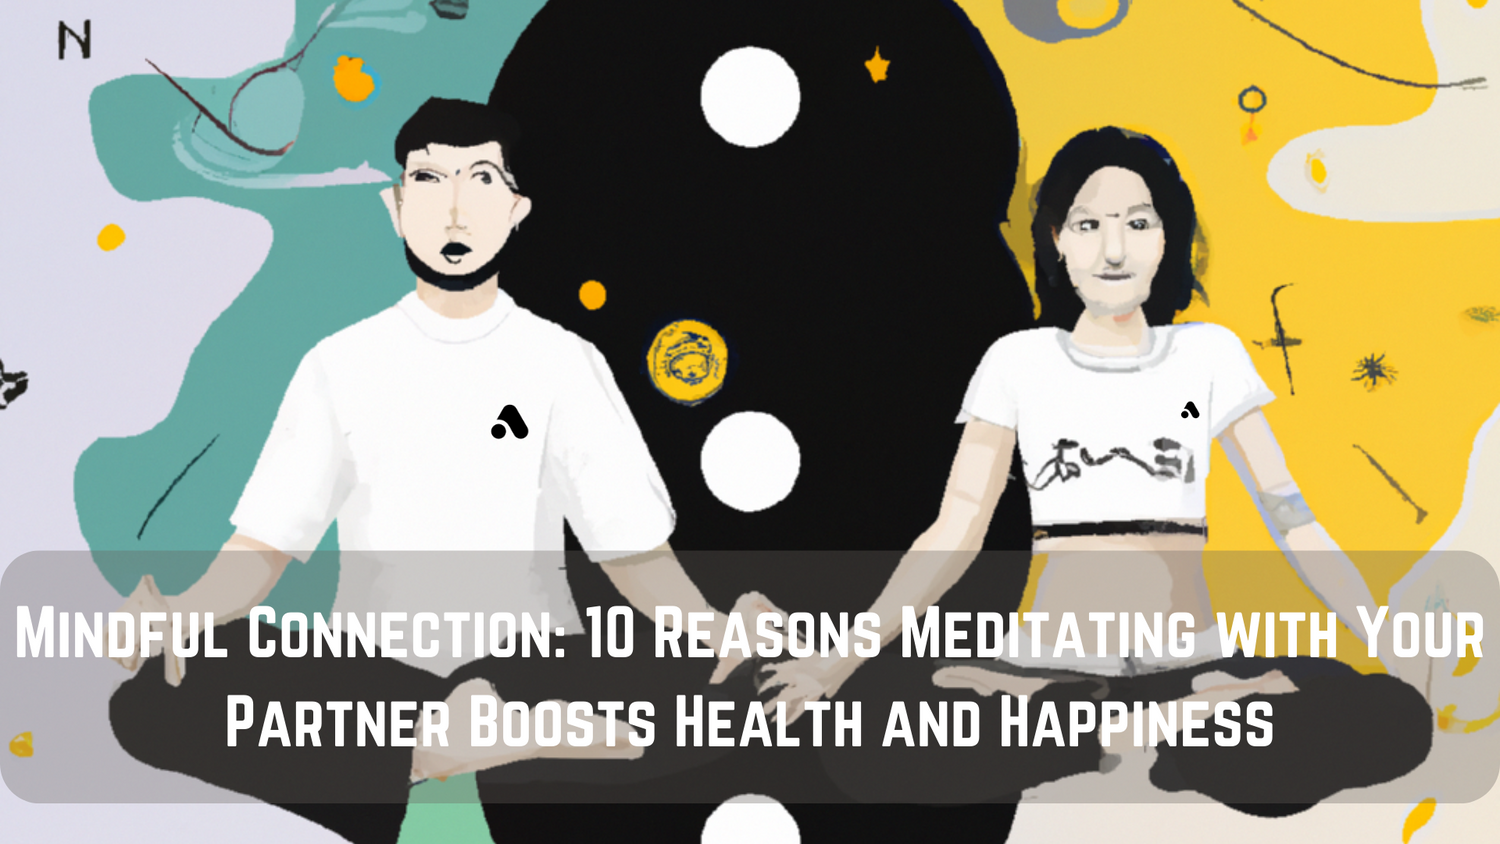 Mindful Connection: 10 Reasons Meditating with Your Partner Boosts Health and Happiness